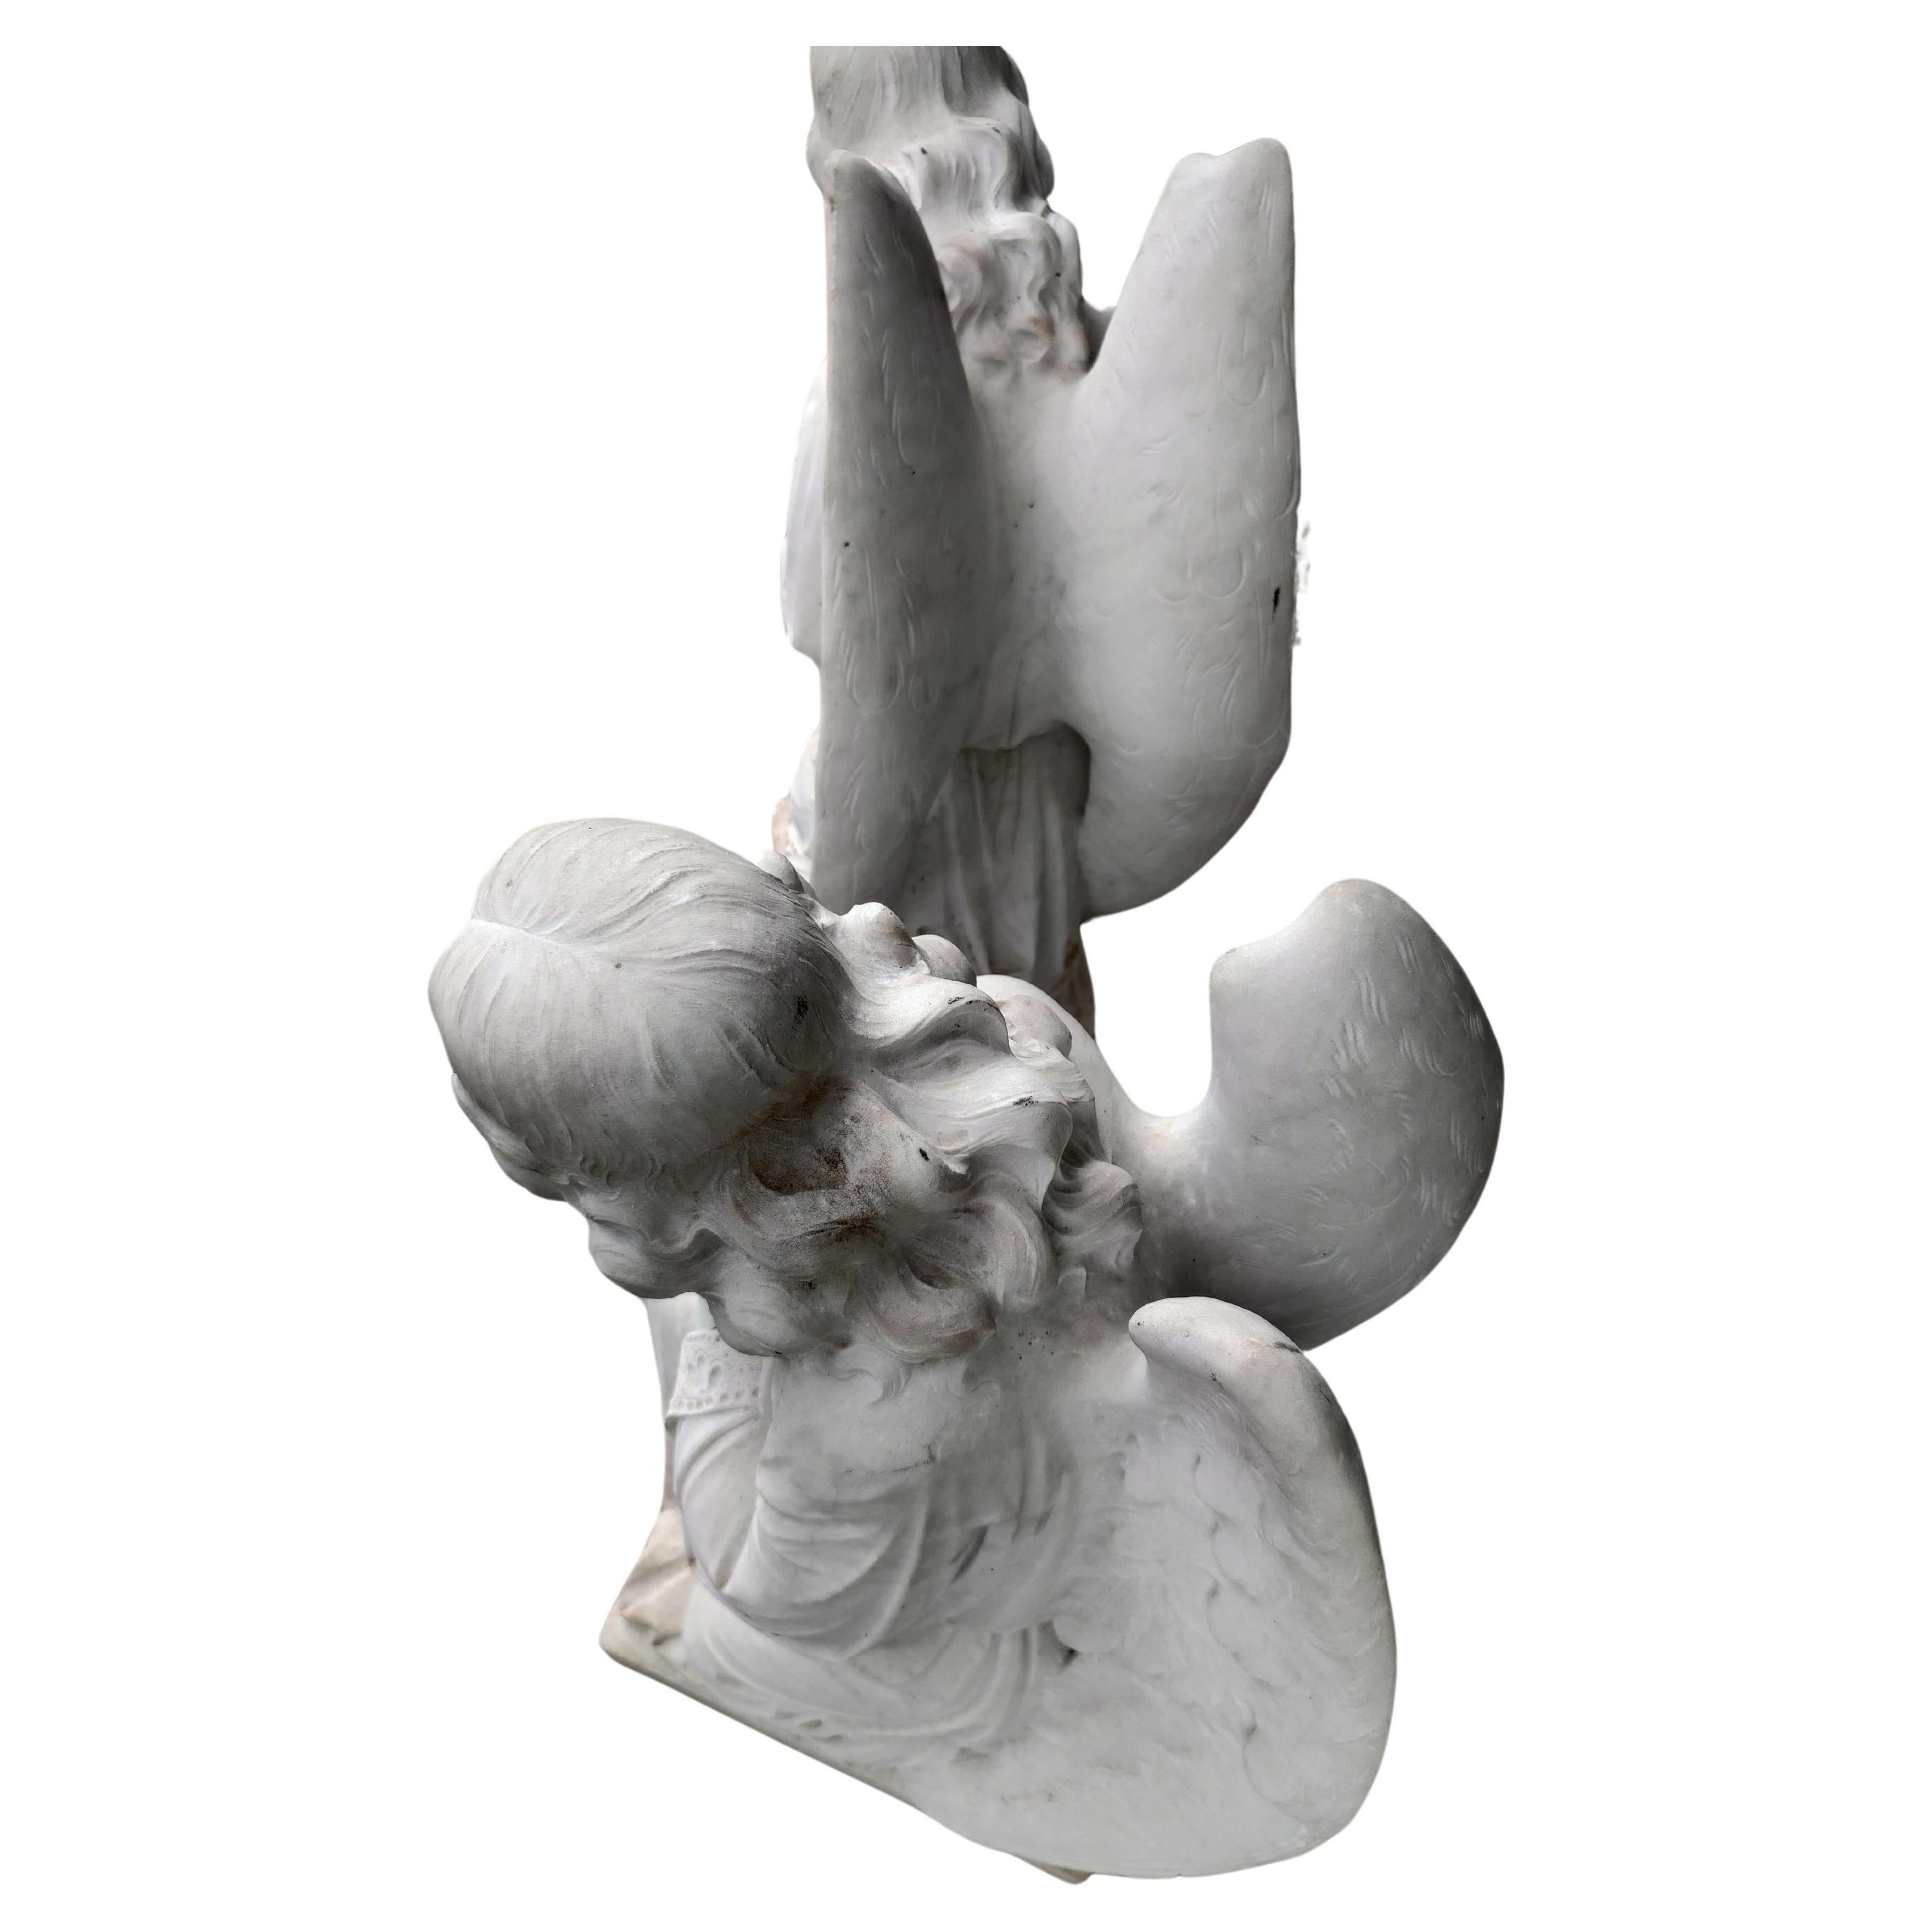 Amazing pair of hand chisiled marble statues of kneeling guardian angels praying. Hand crafted in Italy from Carrara Marble in about the 1920s. These were kept in storage for a number of years and just recently put out on the market. In excellent